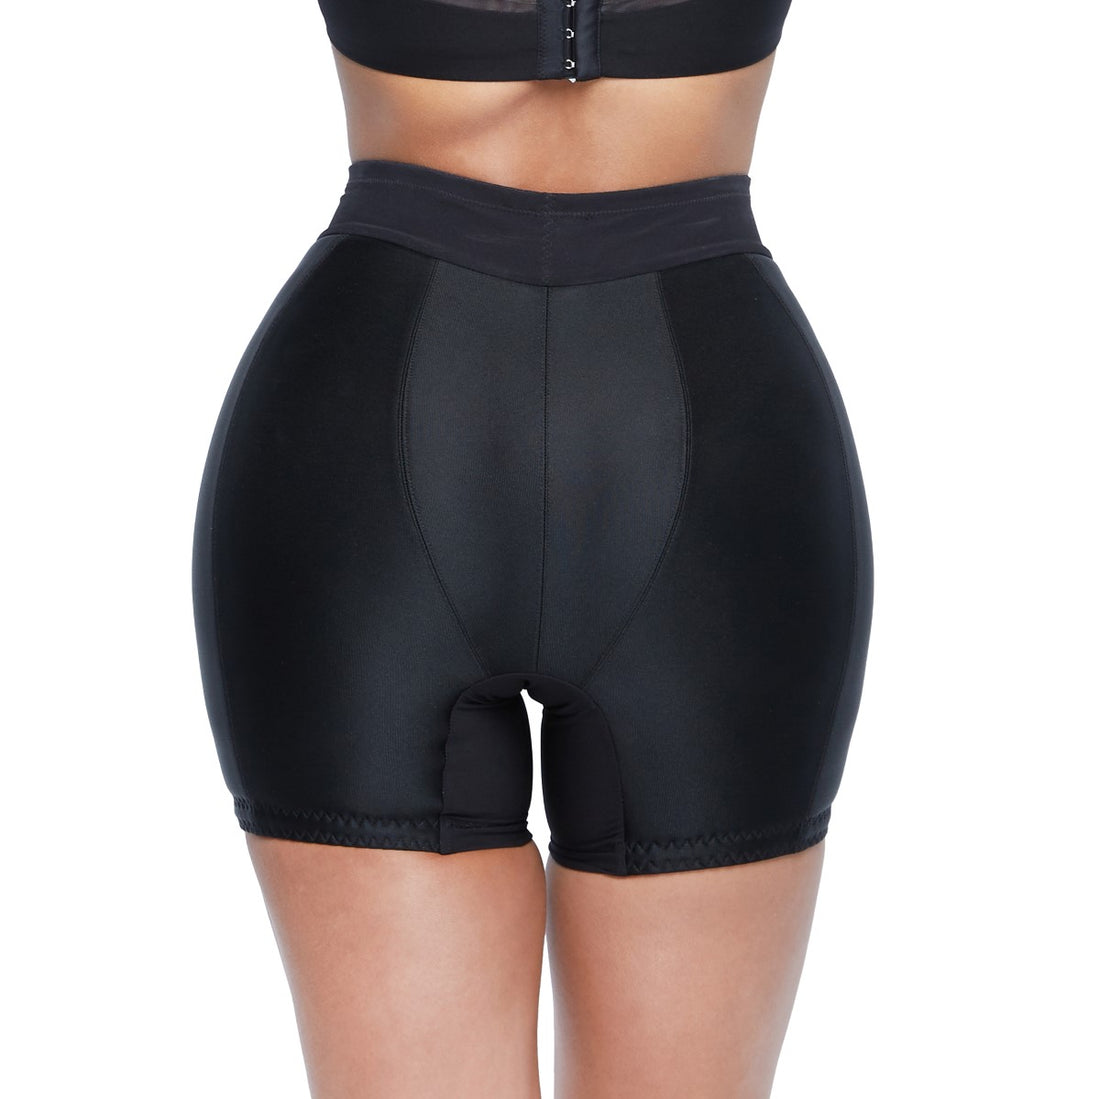 Wacoal FREEDOM butt lift pants Increase hips and buttocks model WX2402  black (BL)